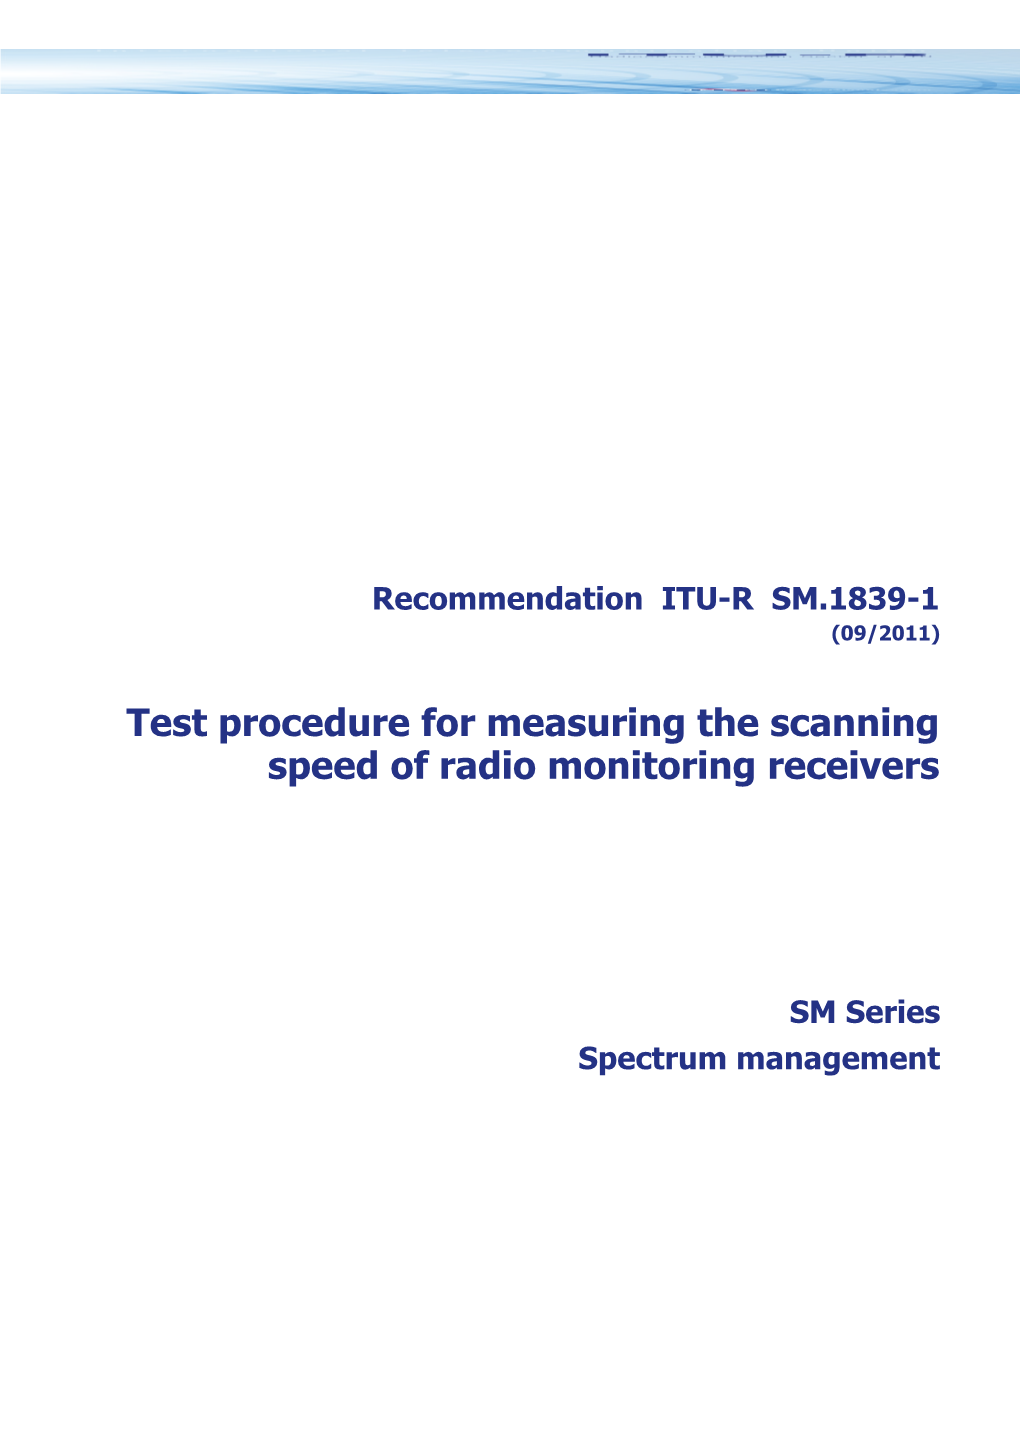 RECOMMENDATION ITU-R SM.1839-1 - Test Procedure for Measuring the Scanning Speed of Radio